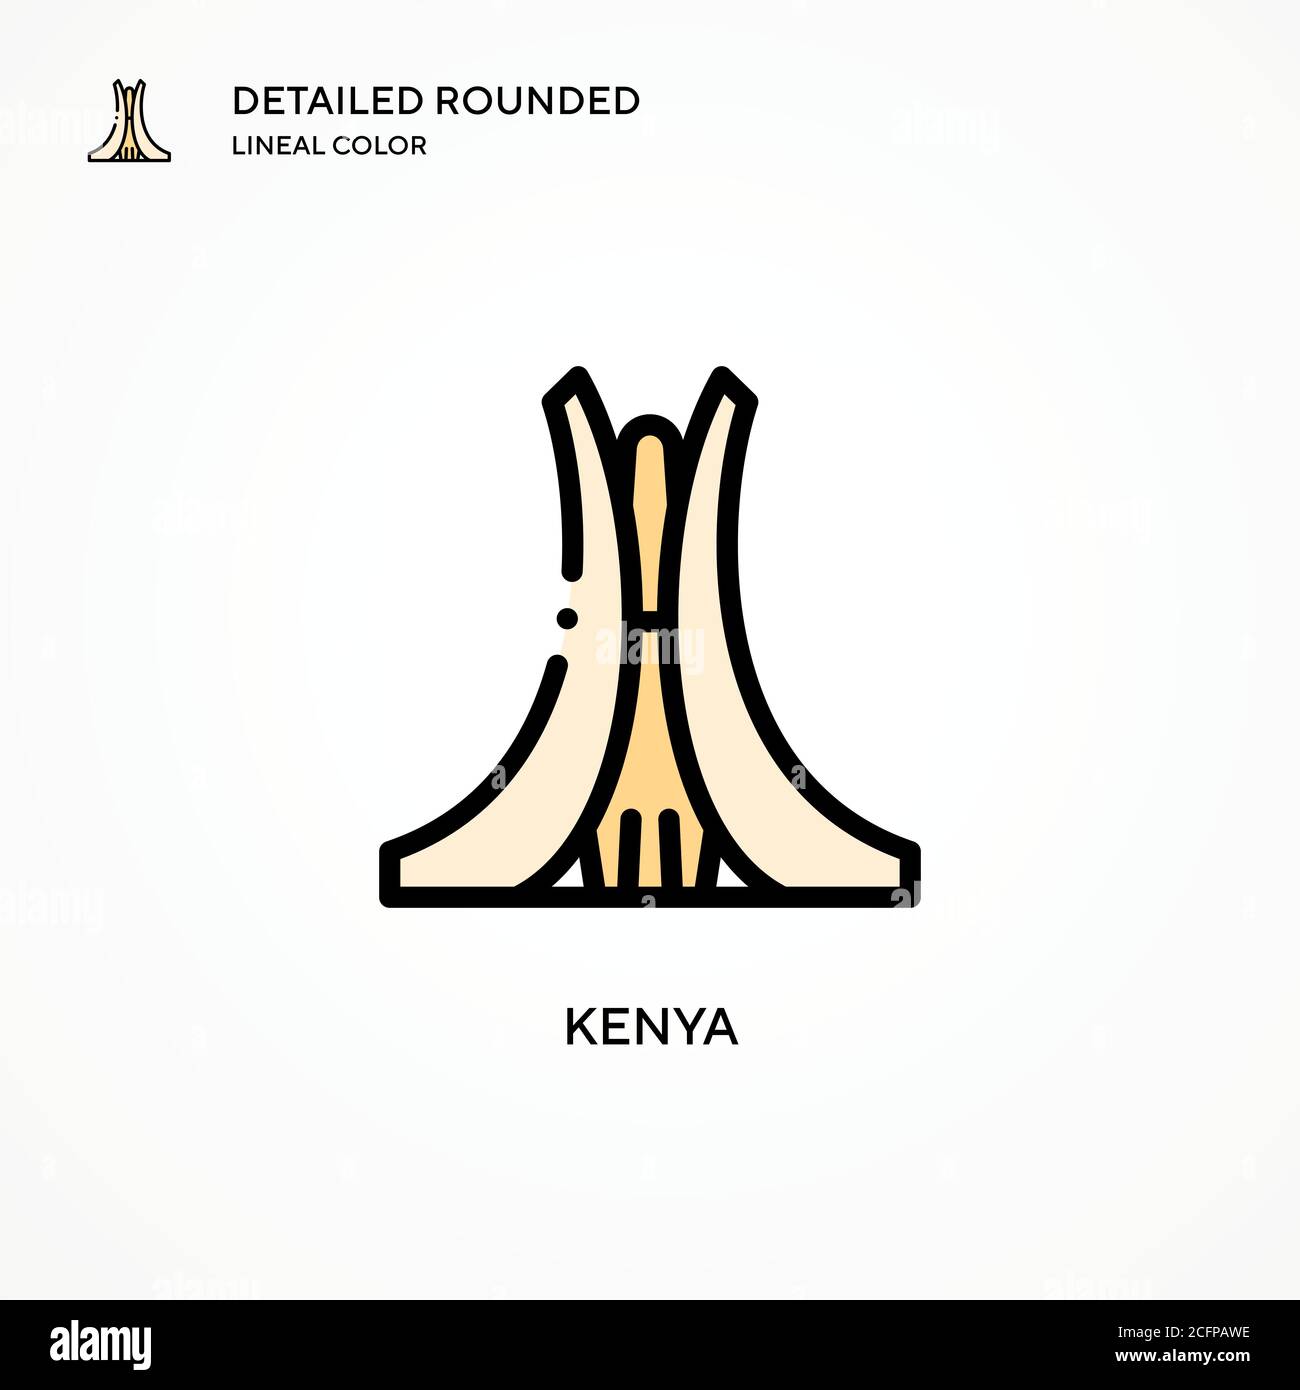 Kenya vector icon. Modern vector illustration concepts. Easy to edit and customize. Stock Vector